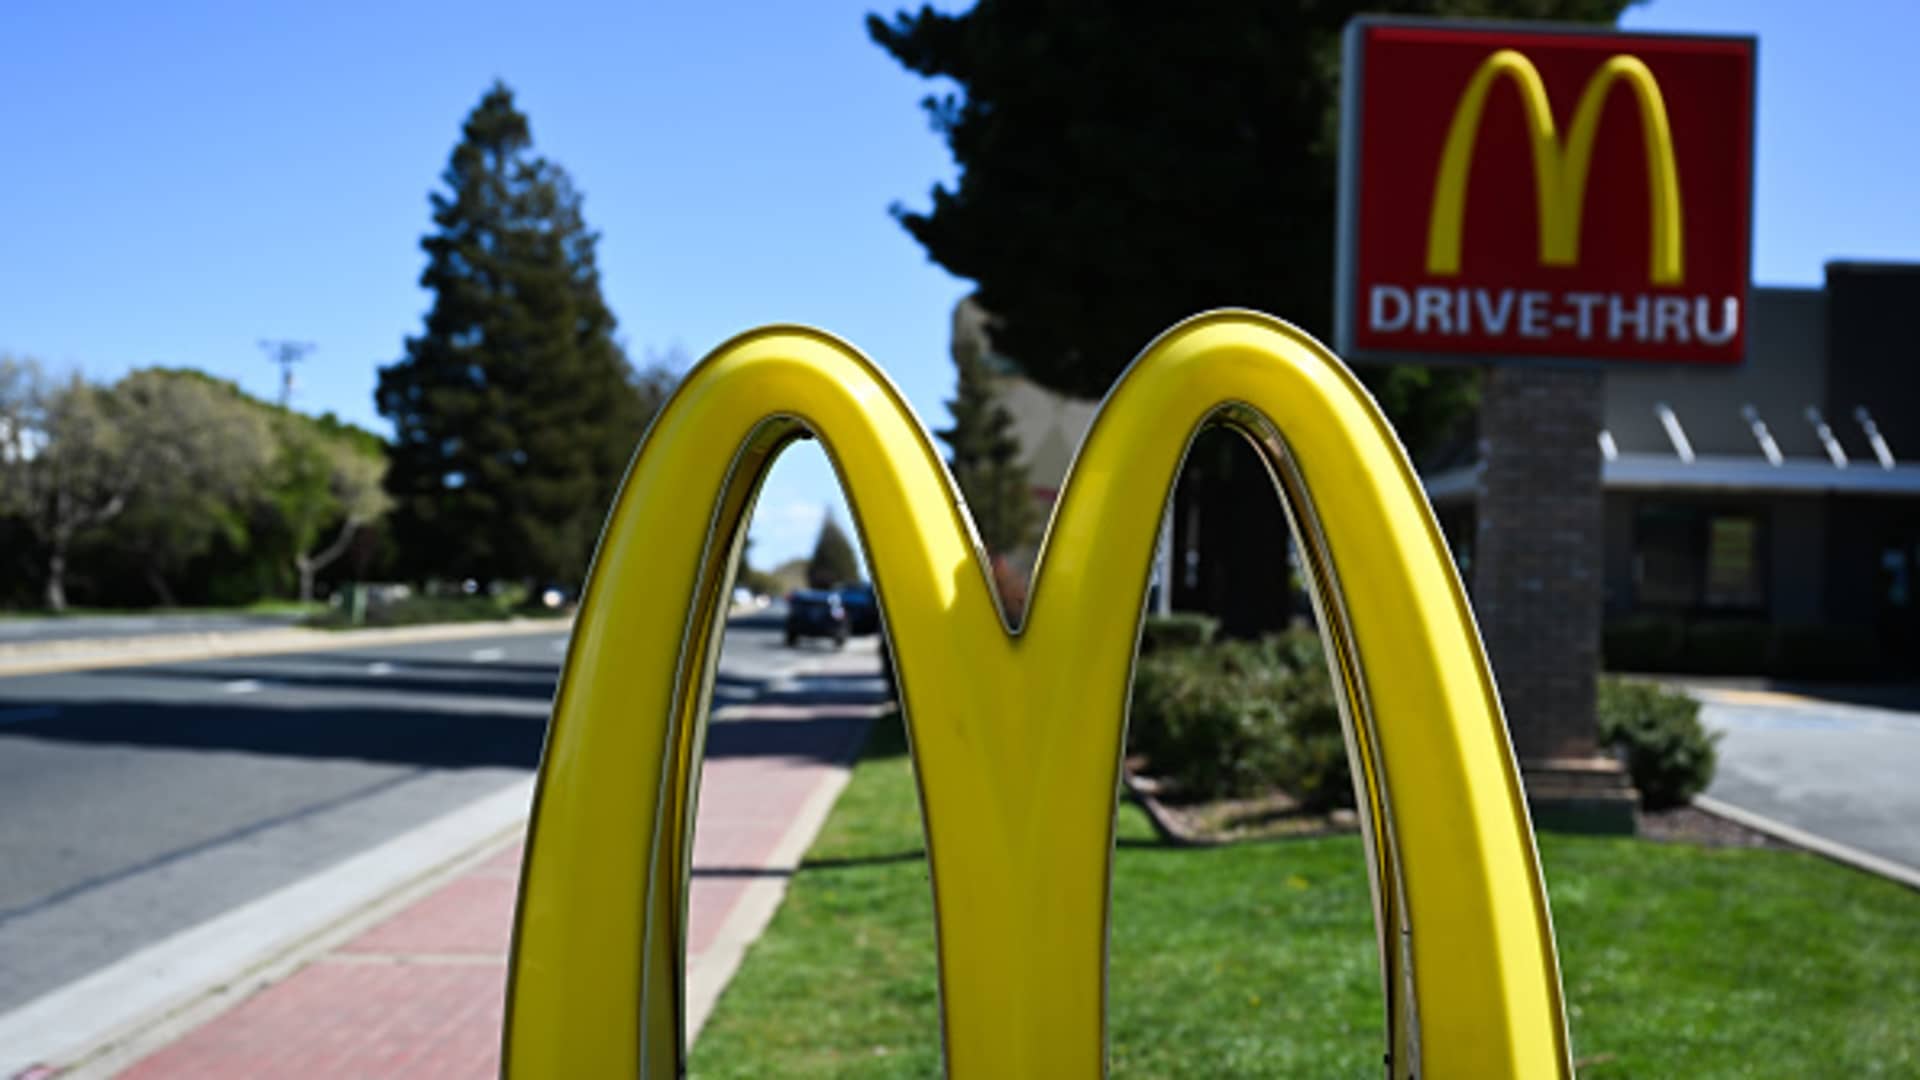 McDonald's franchisee group says new California fast food bill will cause 'devastating financial blow'